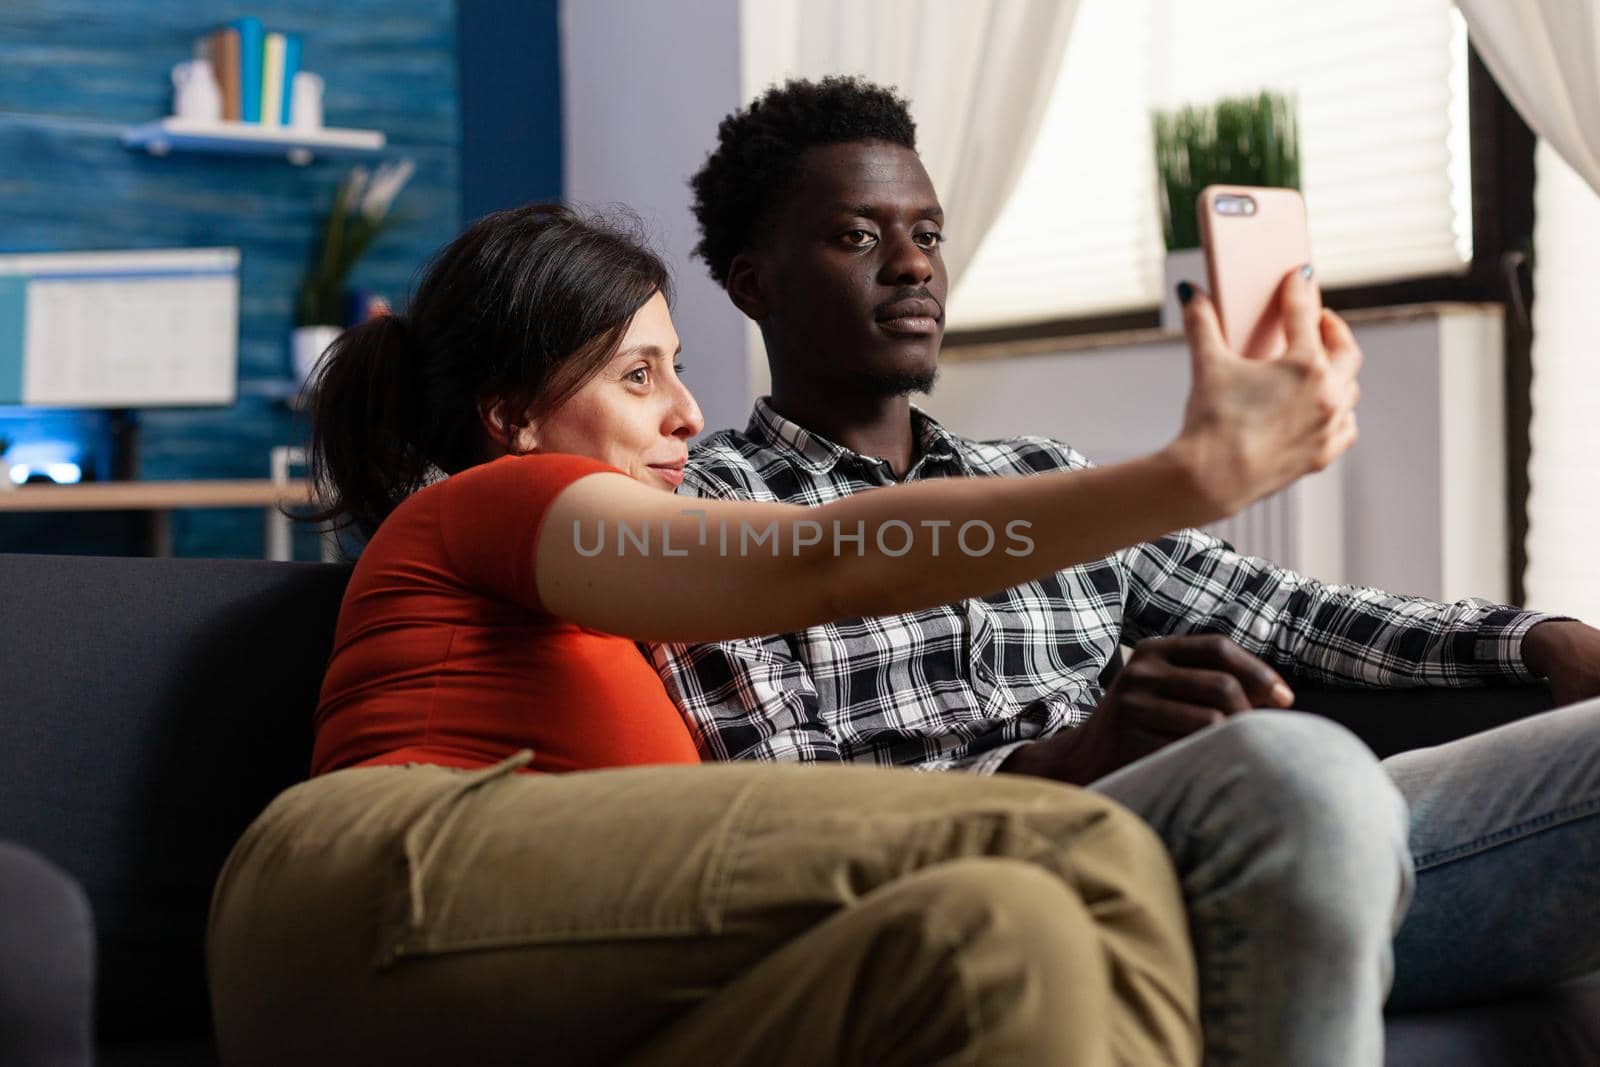 Joyful interracial couple taking selfies together at home. Mixed race people having fun with pictures and snapshots using modern smartphone. Multi ethnic partners with digital device